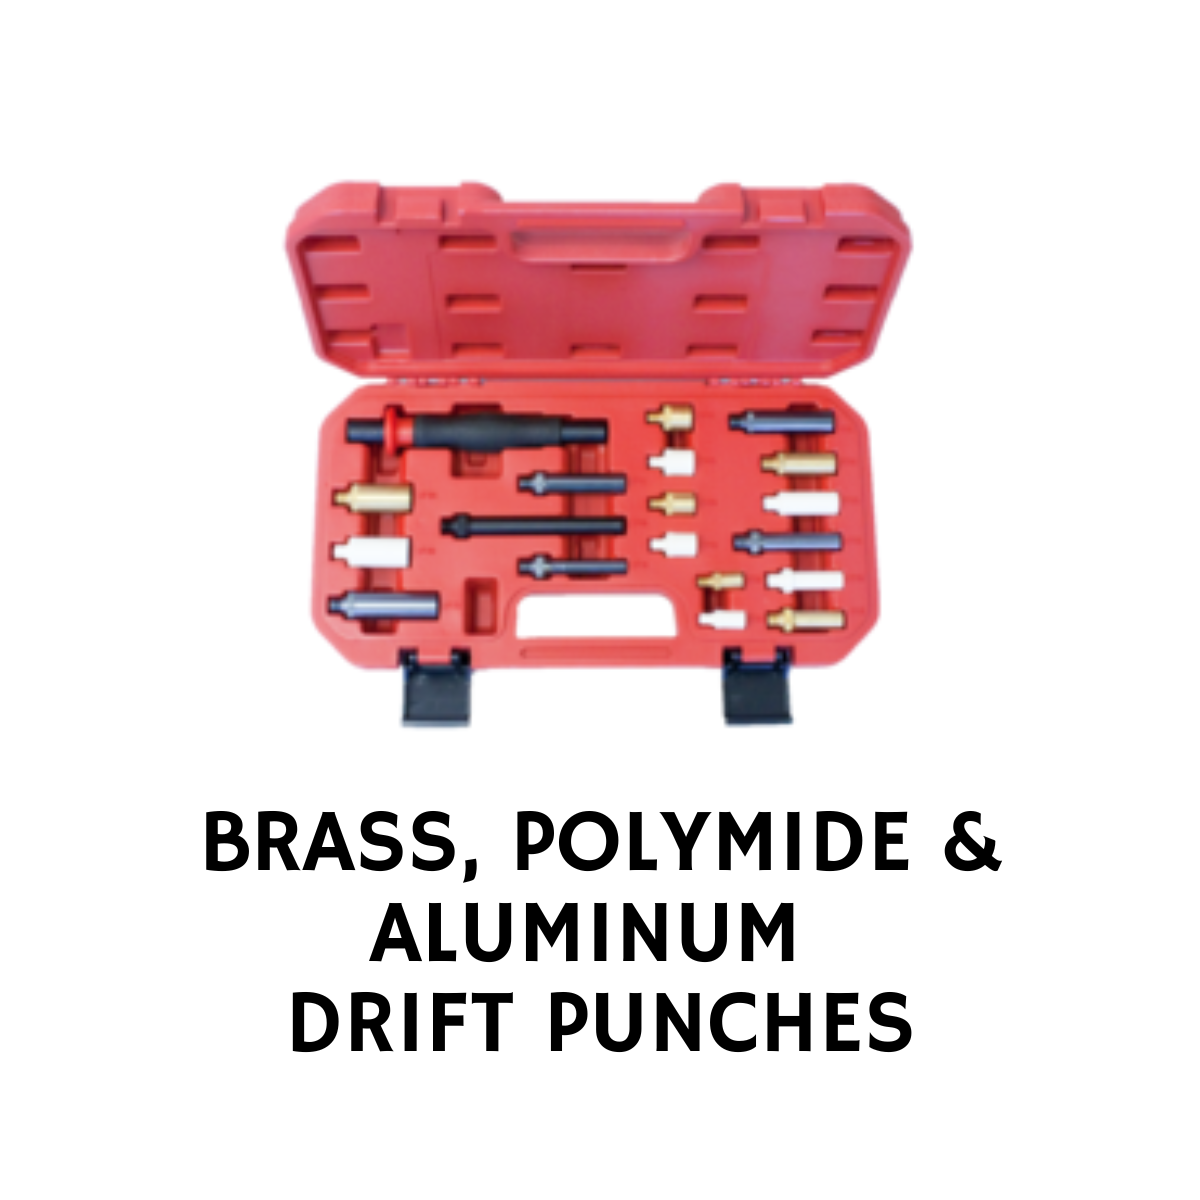 BRASS, POLYMIDE AND ALUMINUM DRIFT PUNCHES